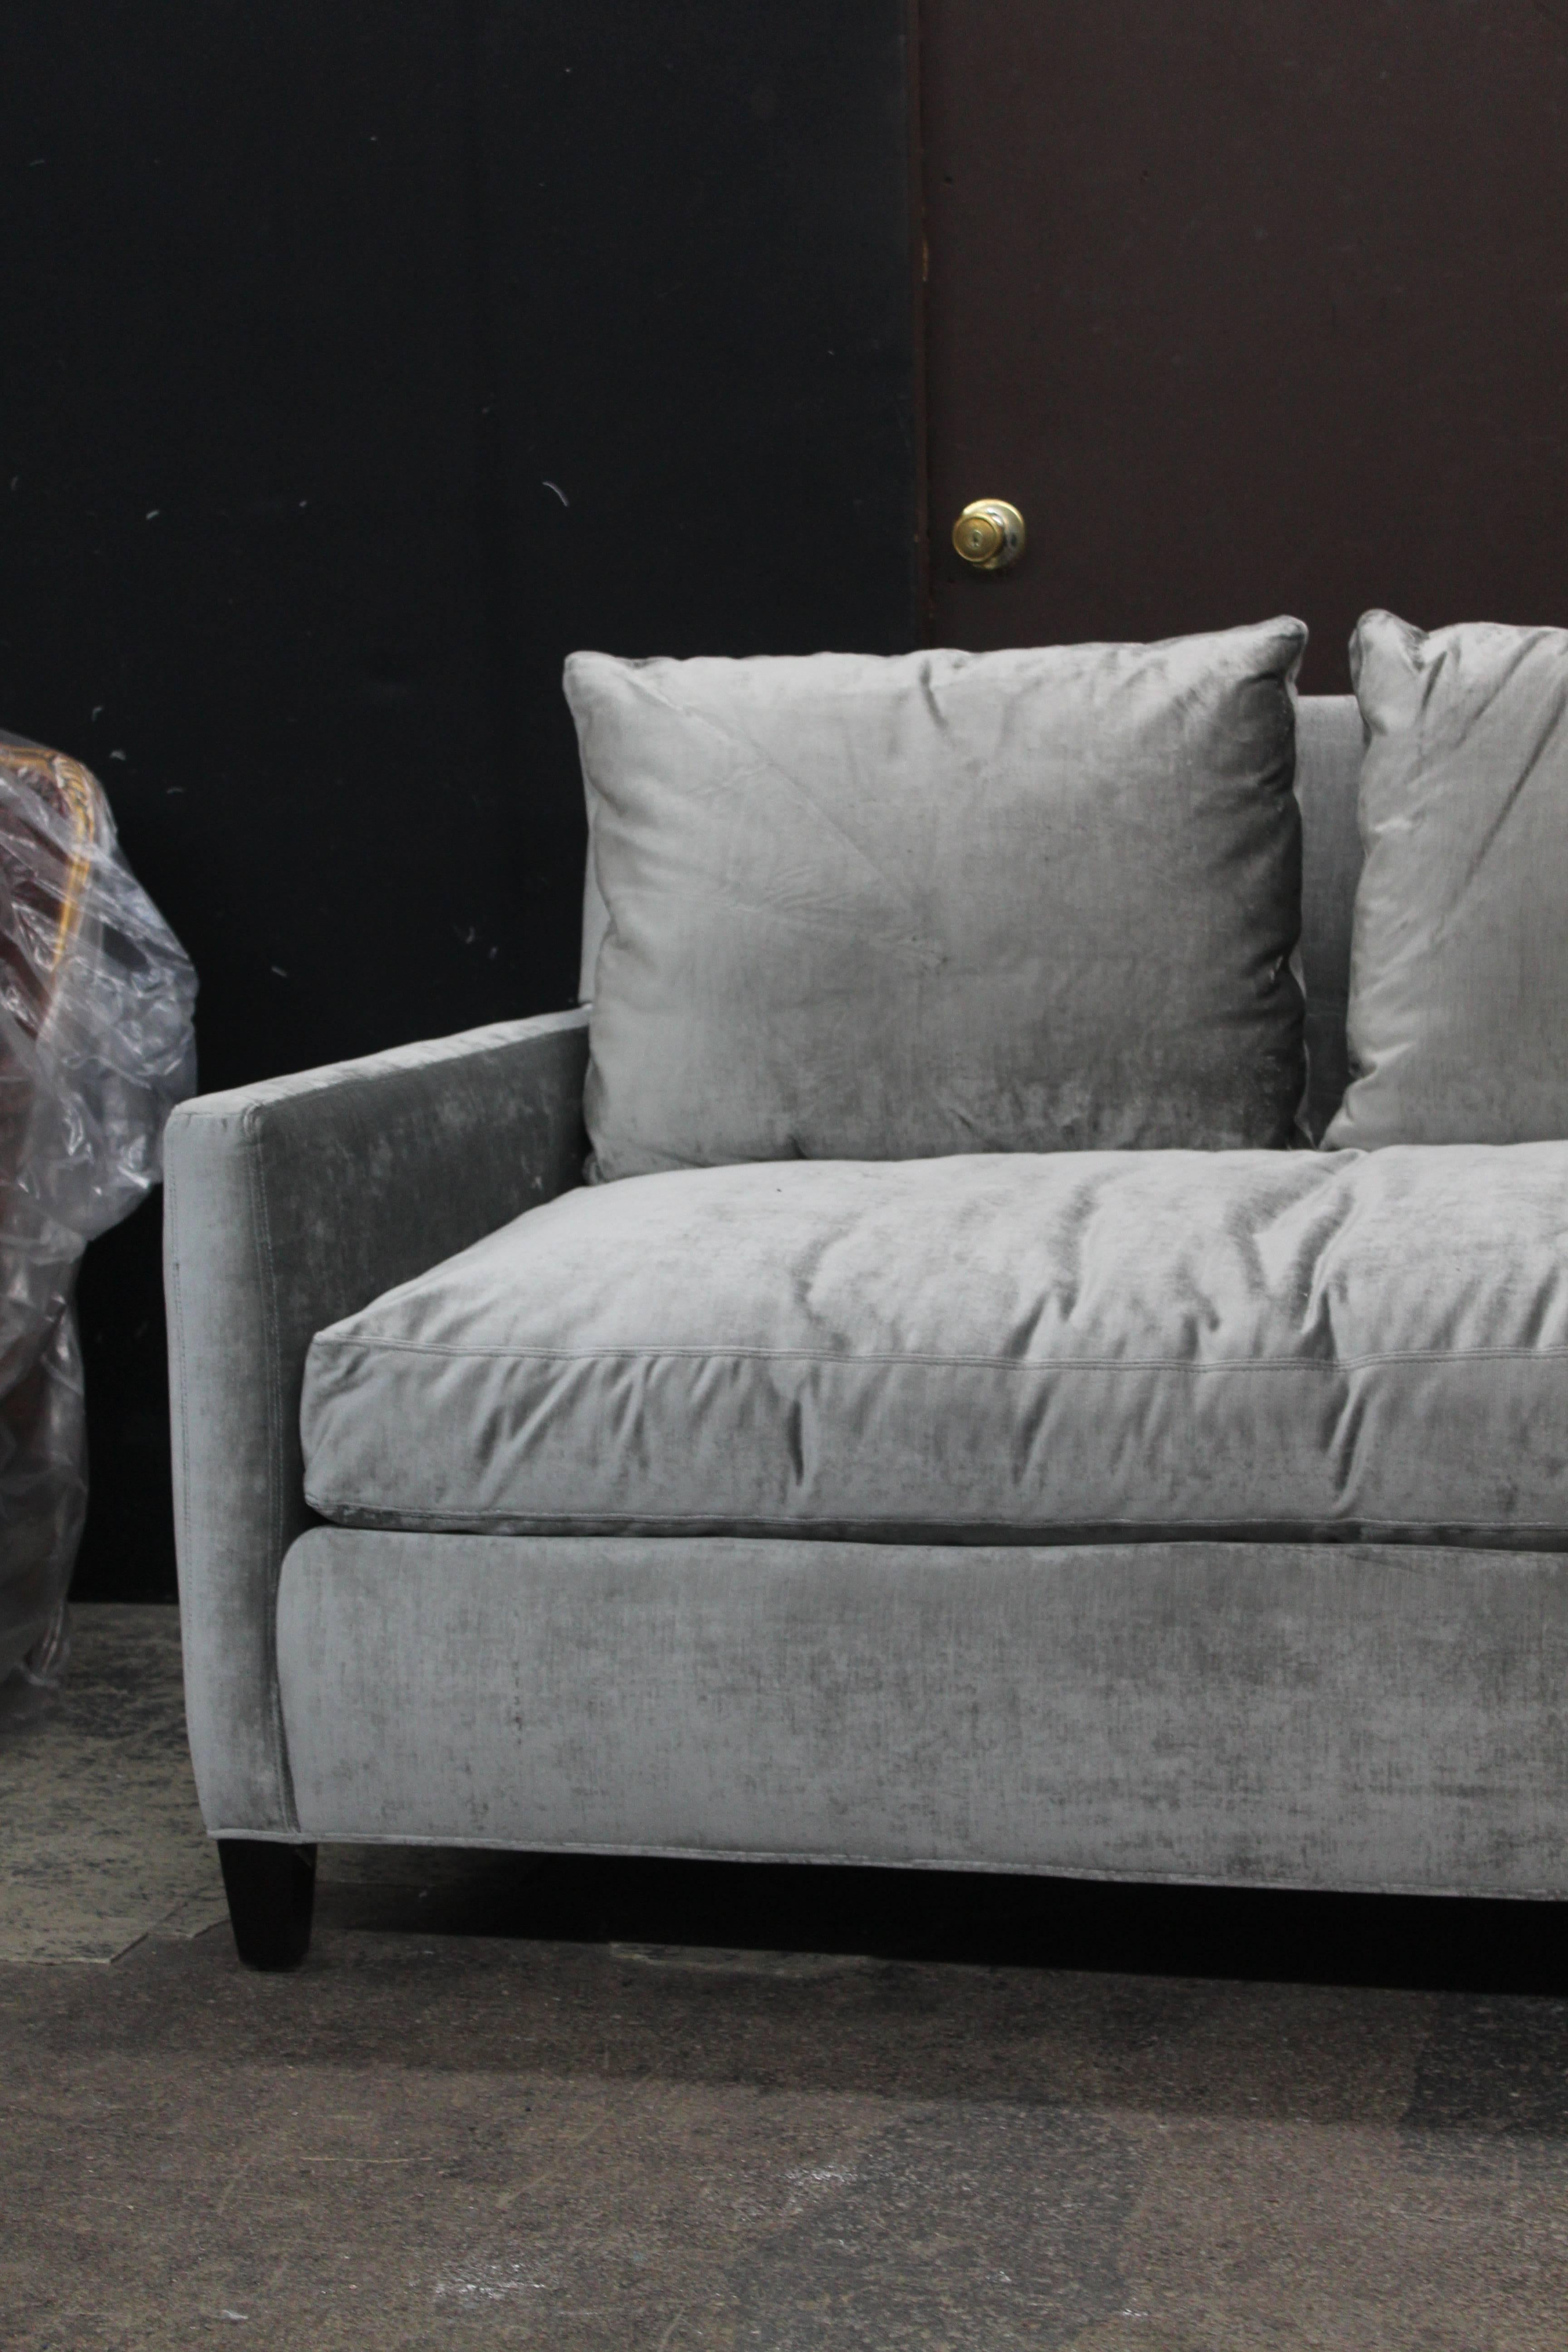 Long and luxurious sofa in silver antique velvet. Seat cushion composition is foam core/down wrap, back cushions are down/down/feather. Top stitch detail throughout. Newly reupholstered.